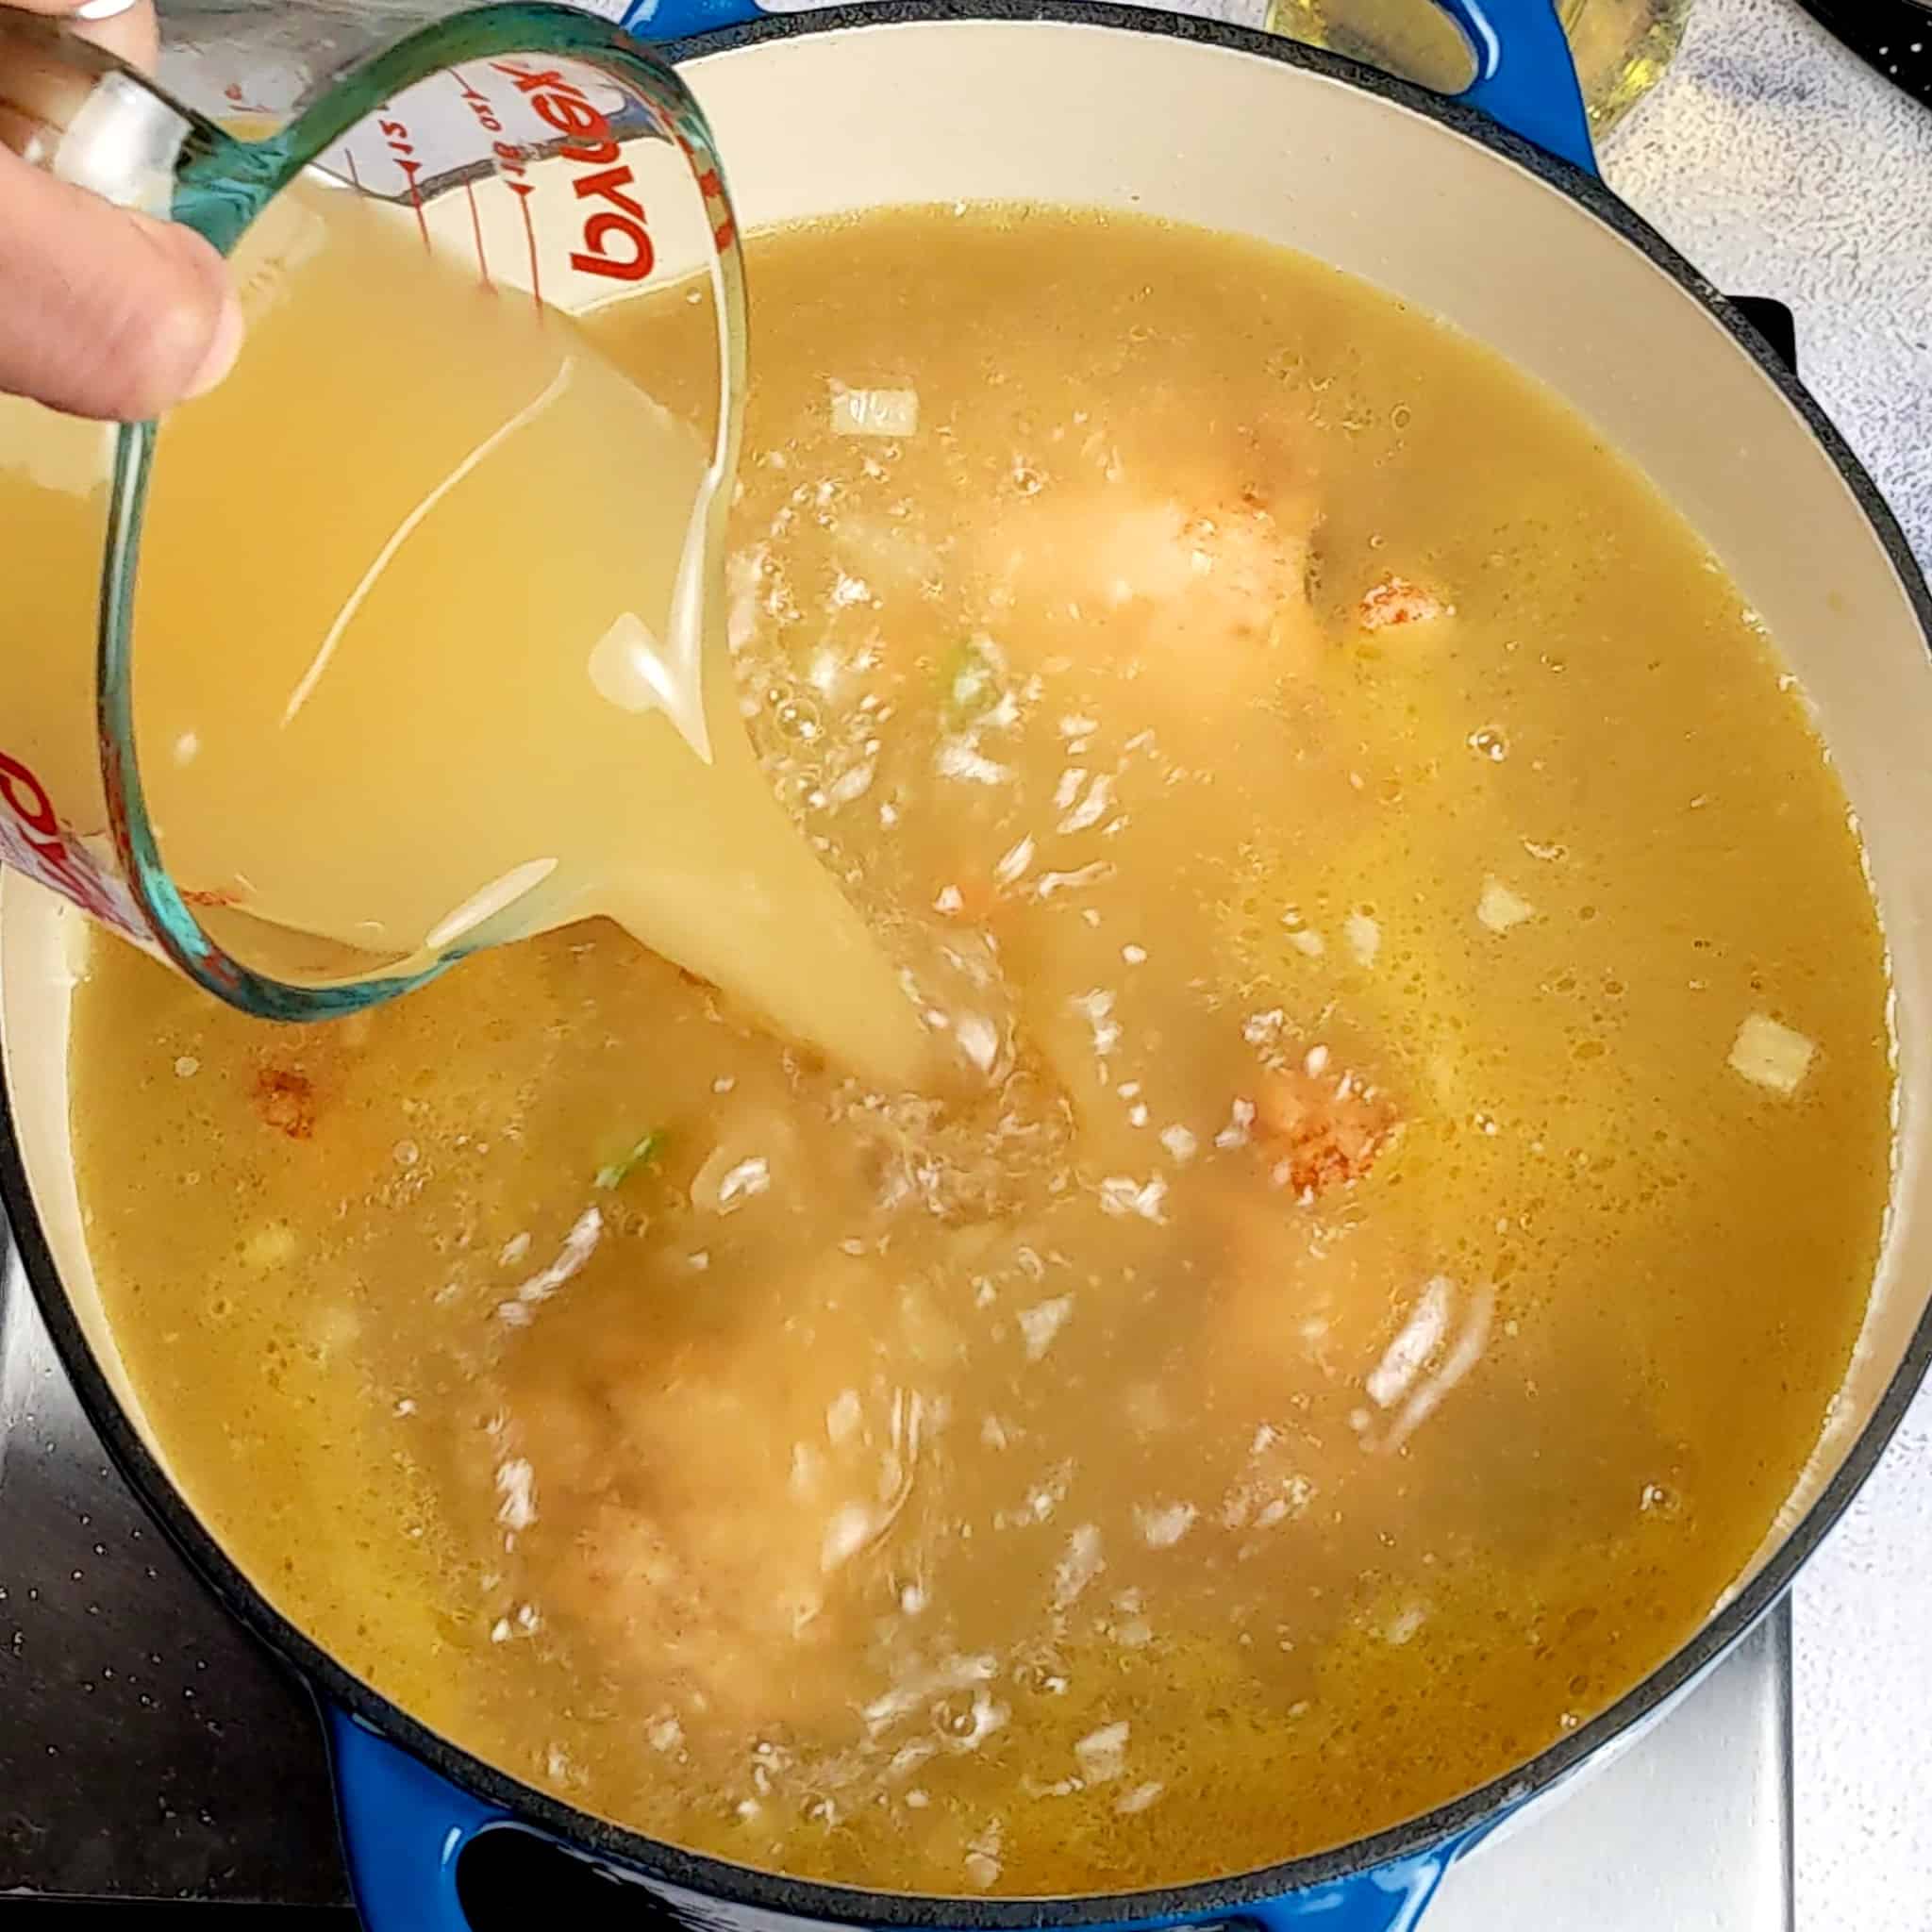 chicken broth being poured into the pot